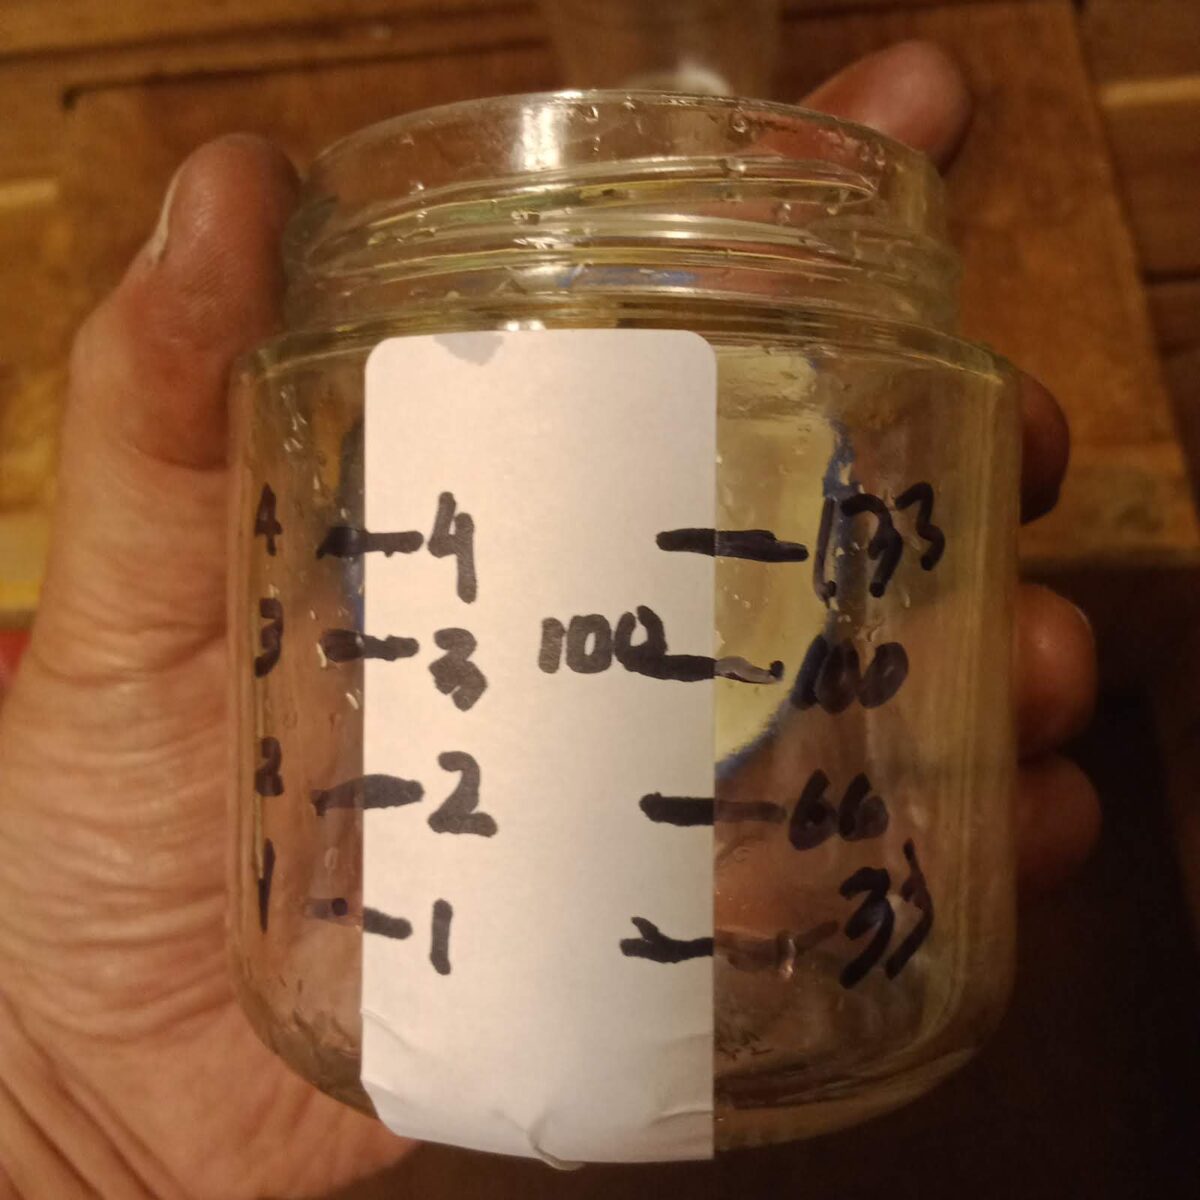 Making a Graduated Cylinder Measuring Cup from a Jar